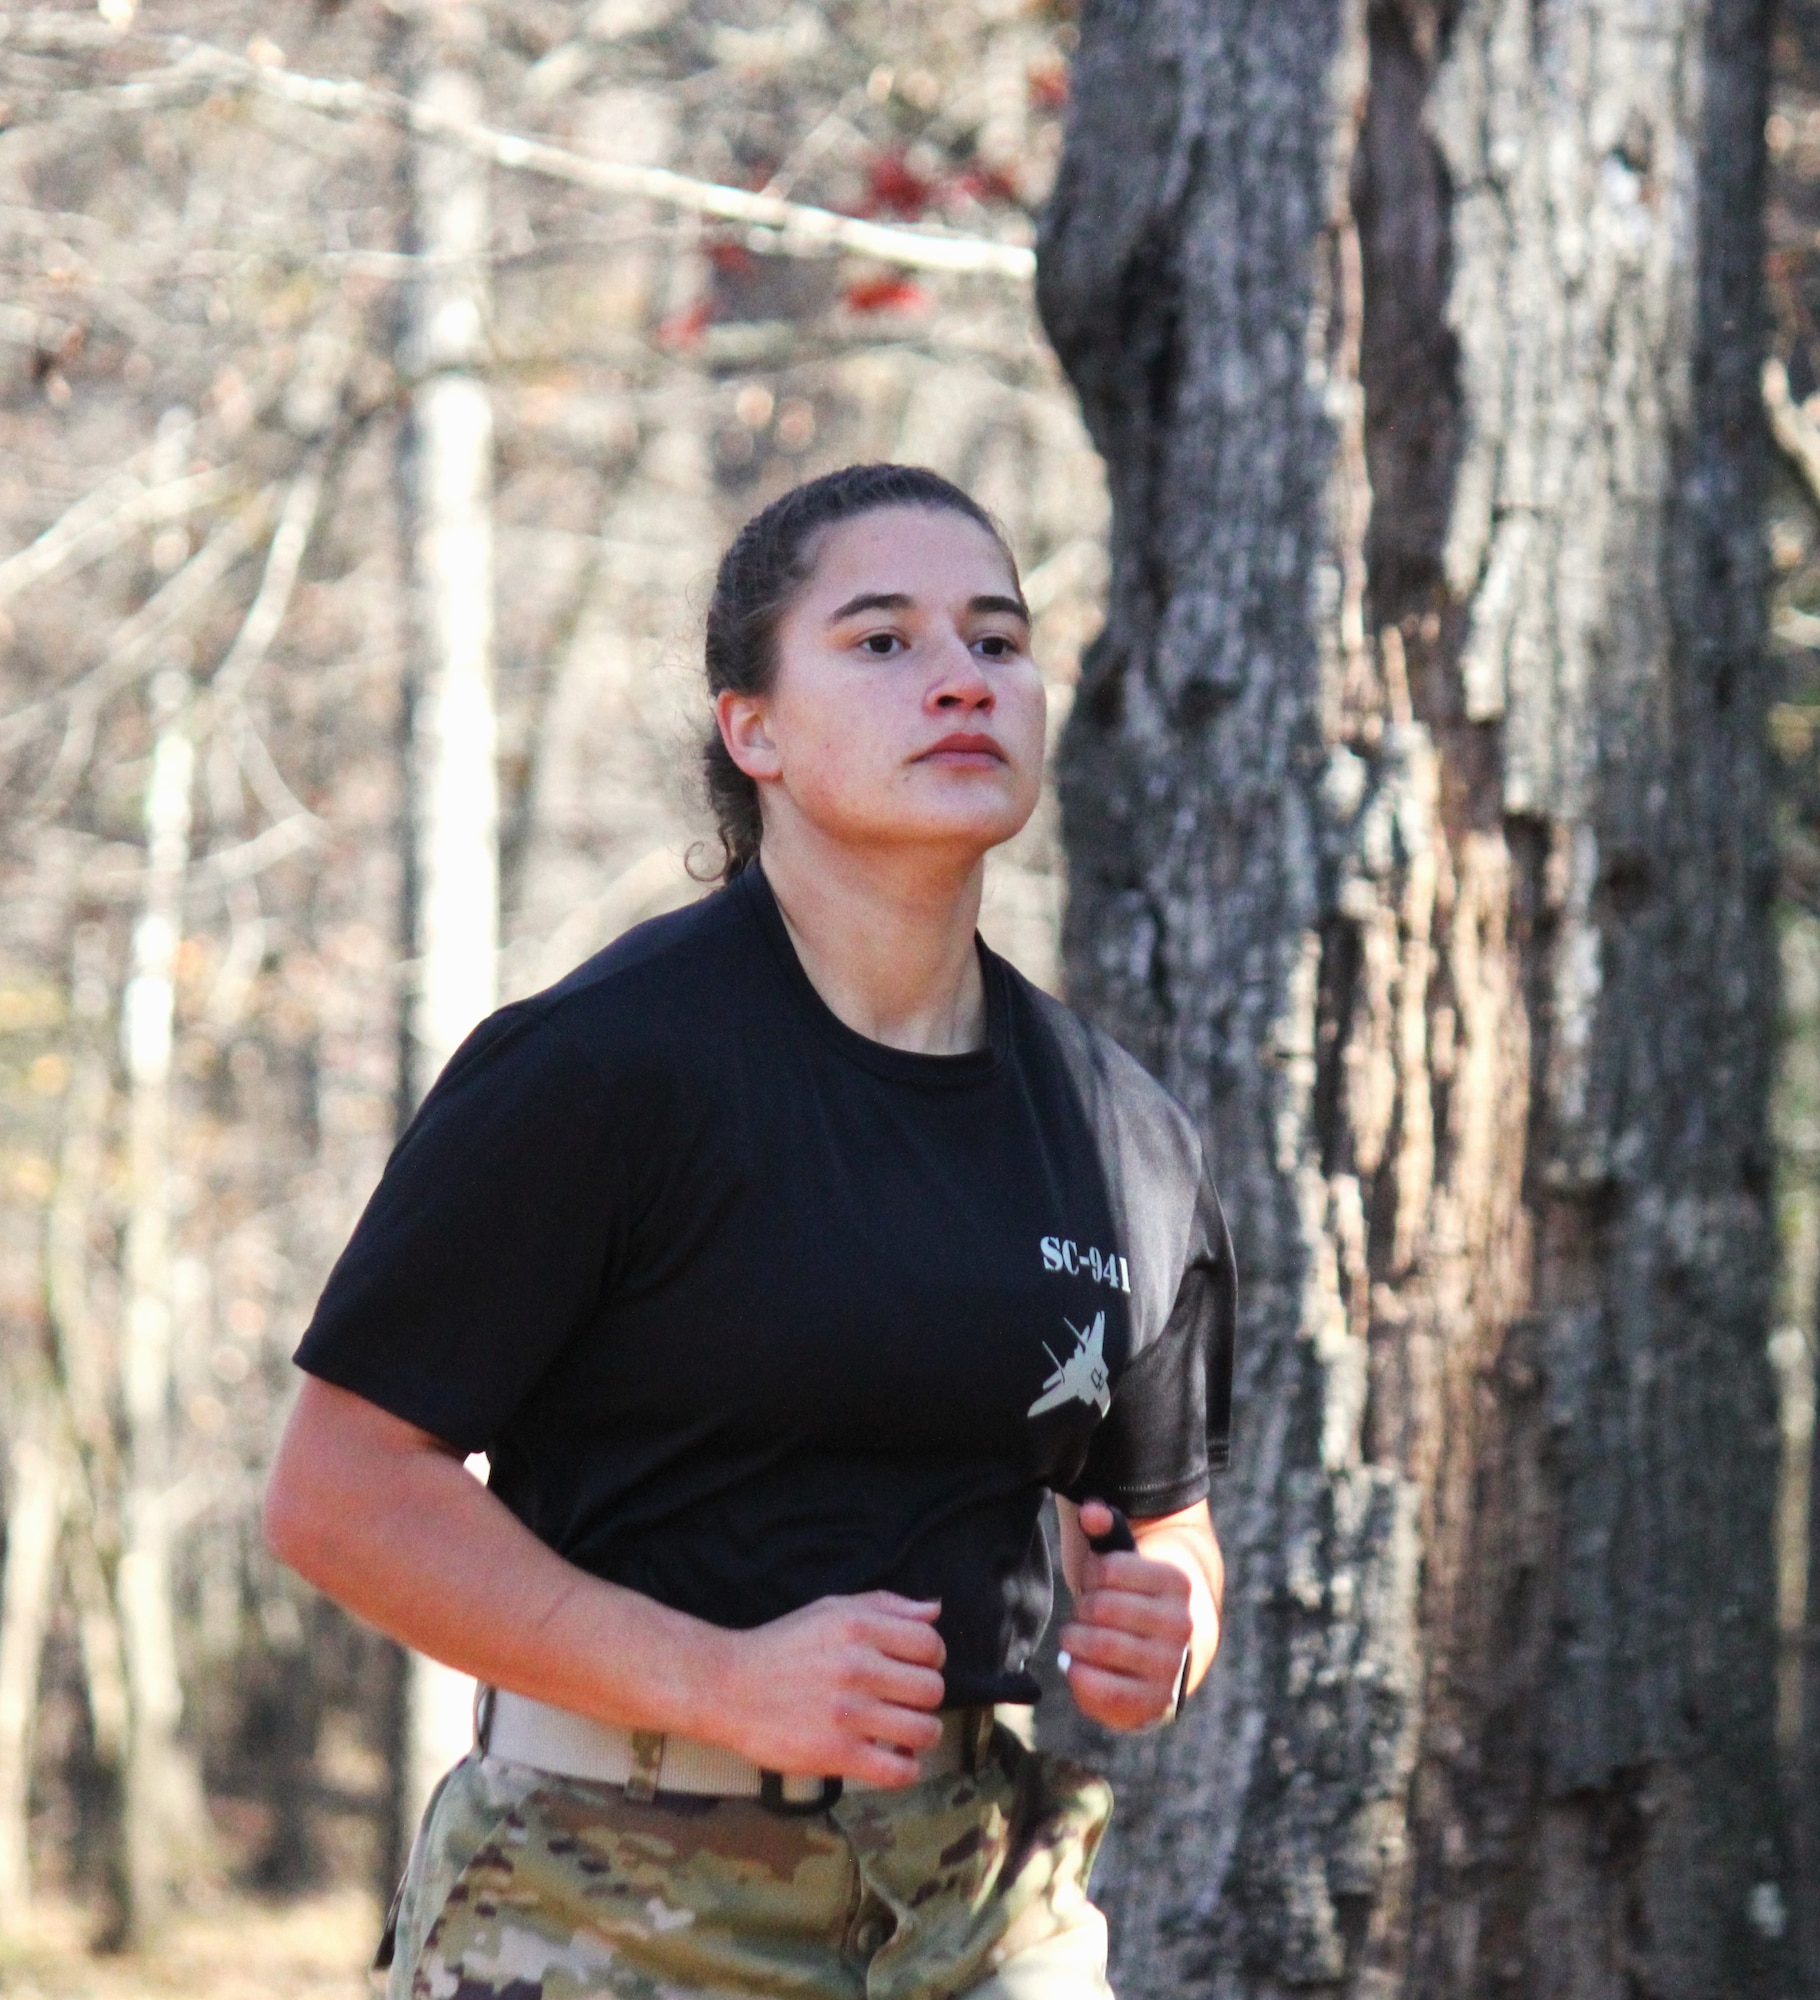 Cadet Klugo competes in the "Ultimate Raider" event.